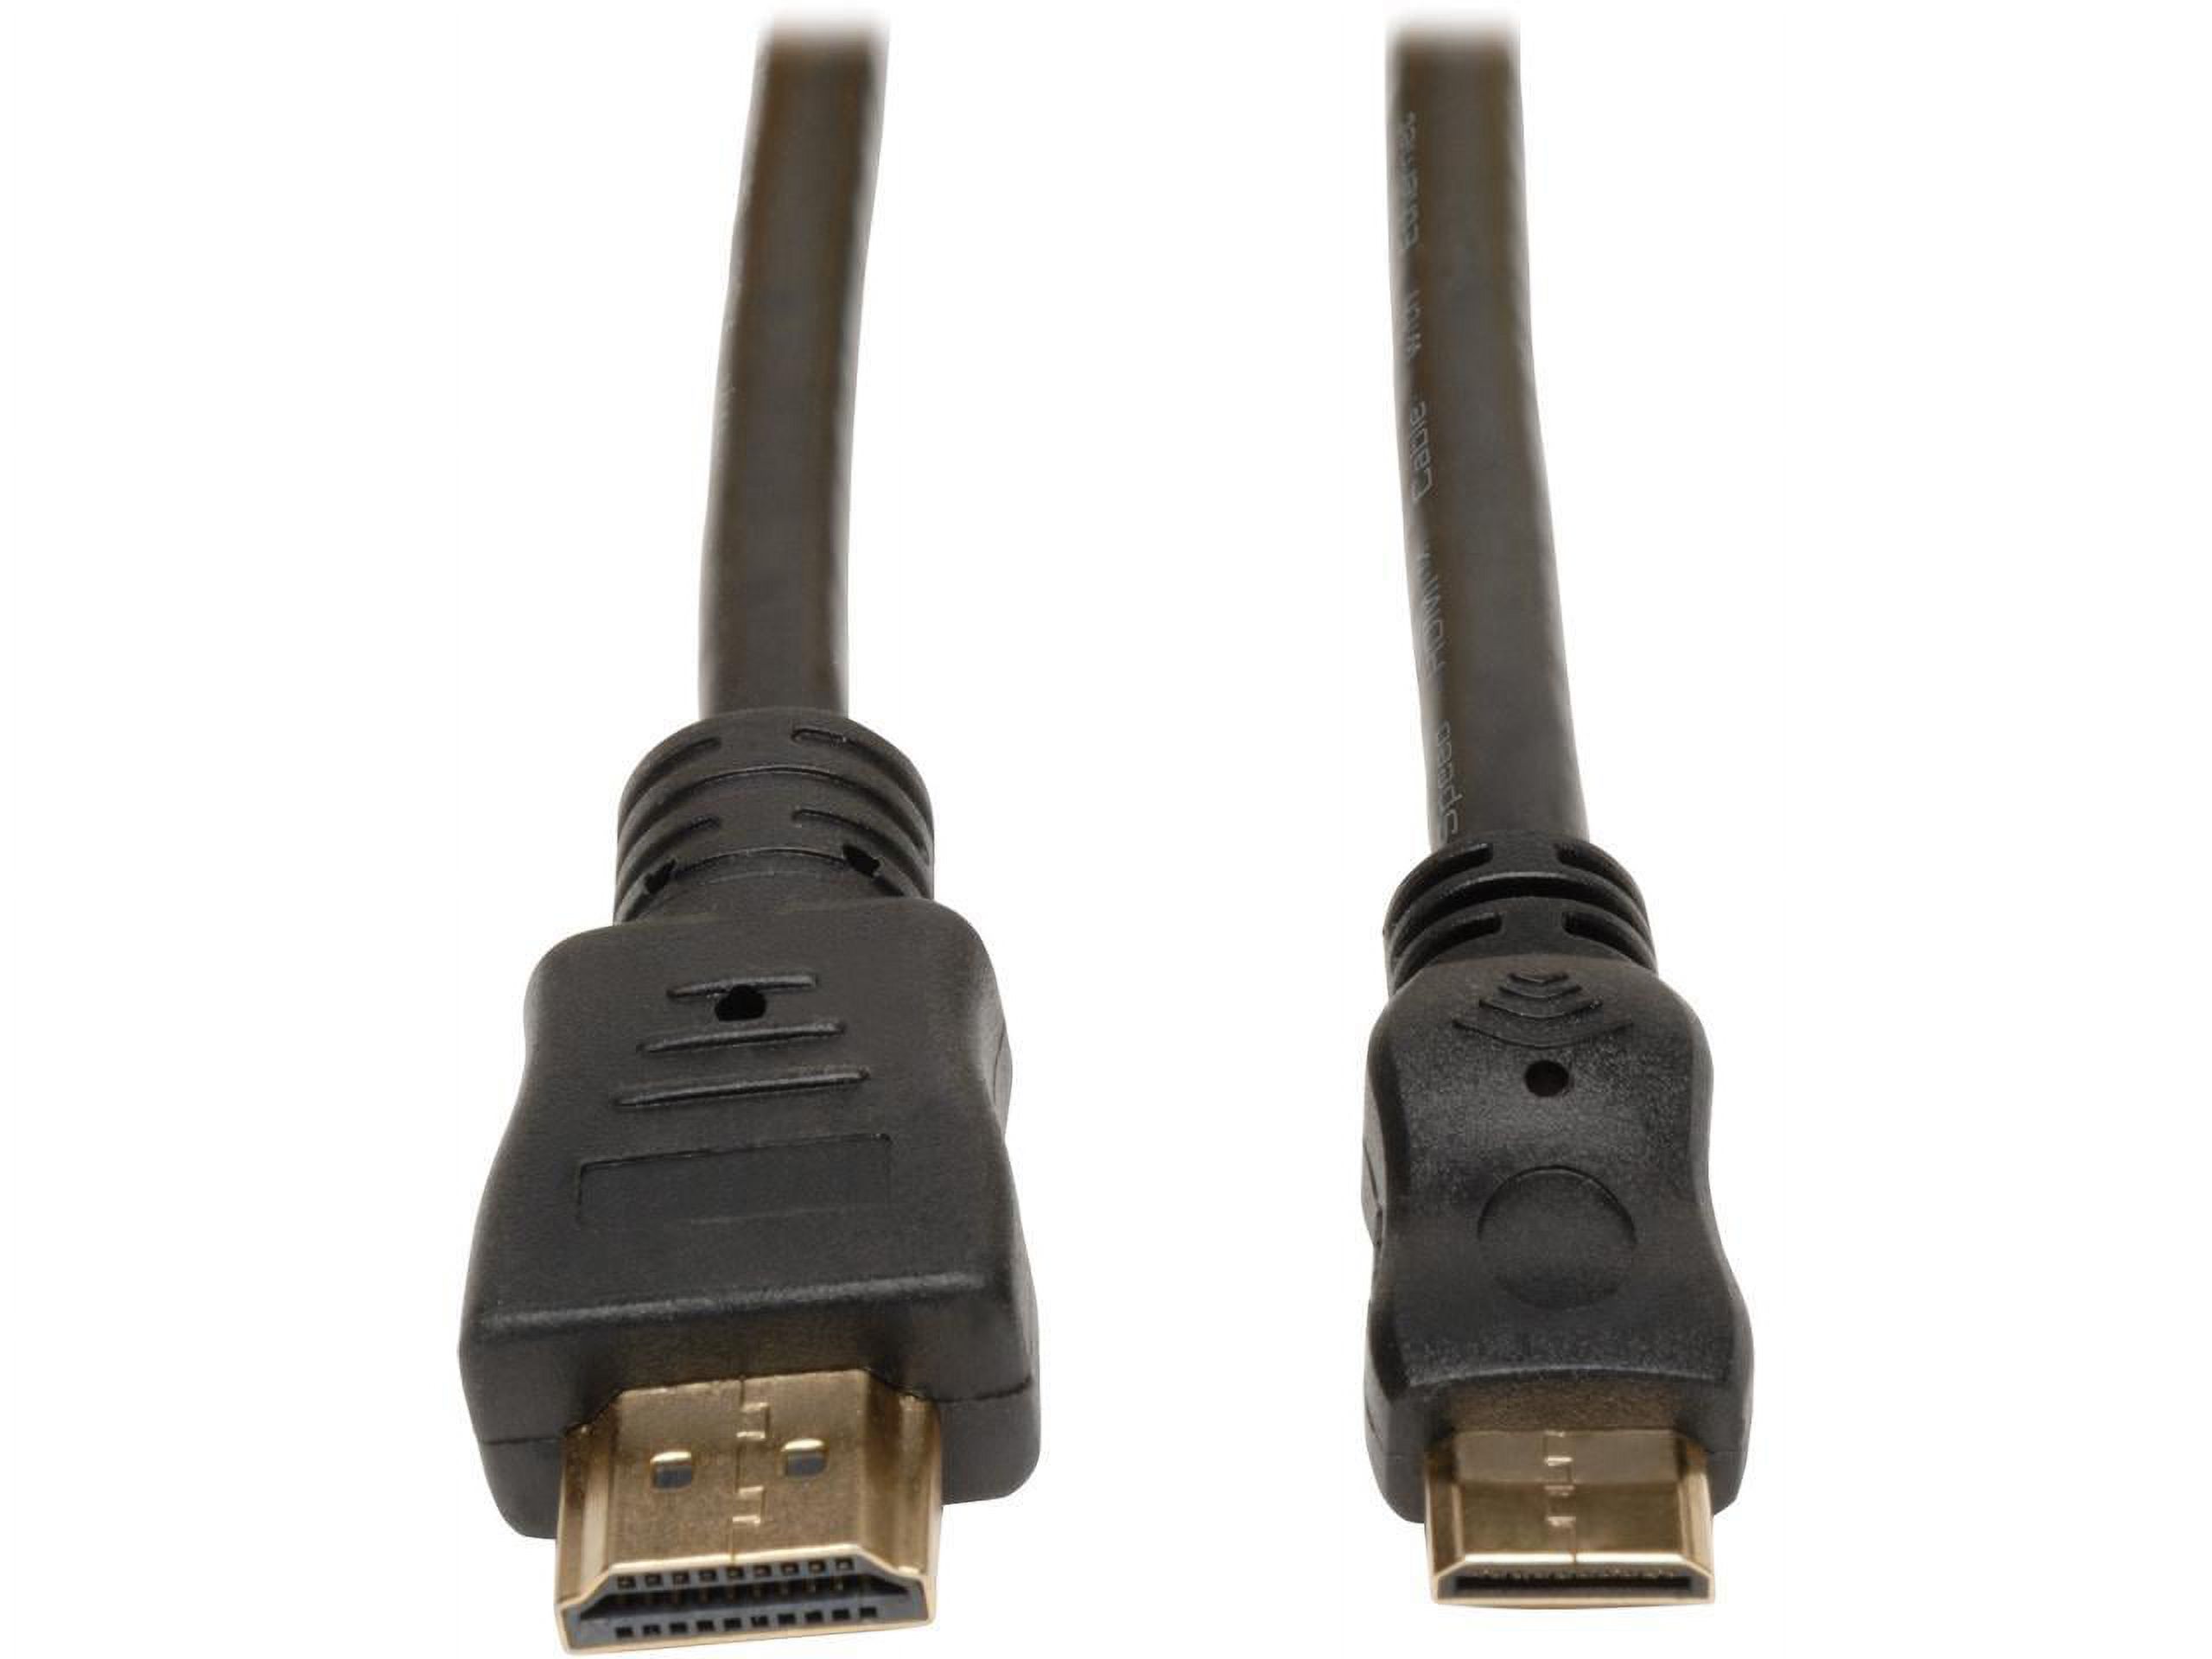 Tripp Lite P571-006-MINI 6ft High Speed with Ethernet HDMI to Mini HDMI Cable - image 1 of 2